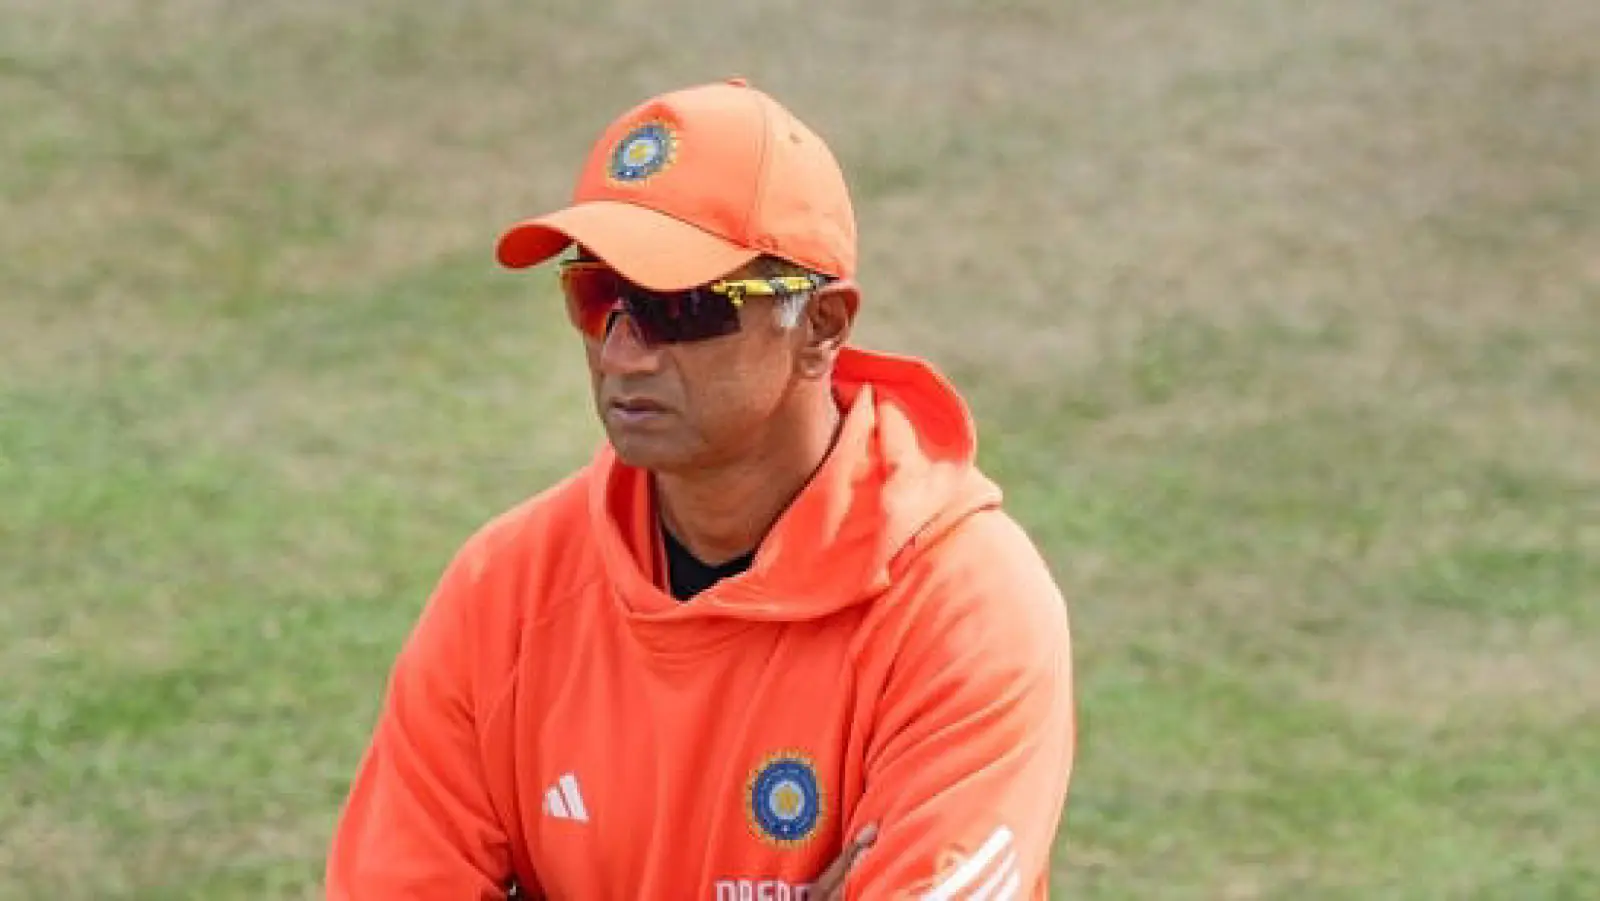 Rahul Dravid is worried about the players getting injured in the IND vs PAK match, gave a big statement about the pitch